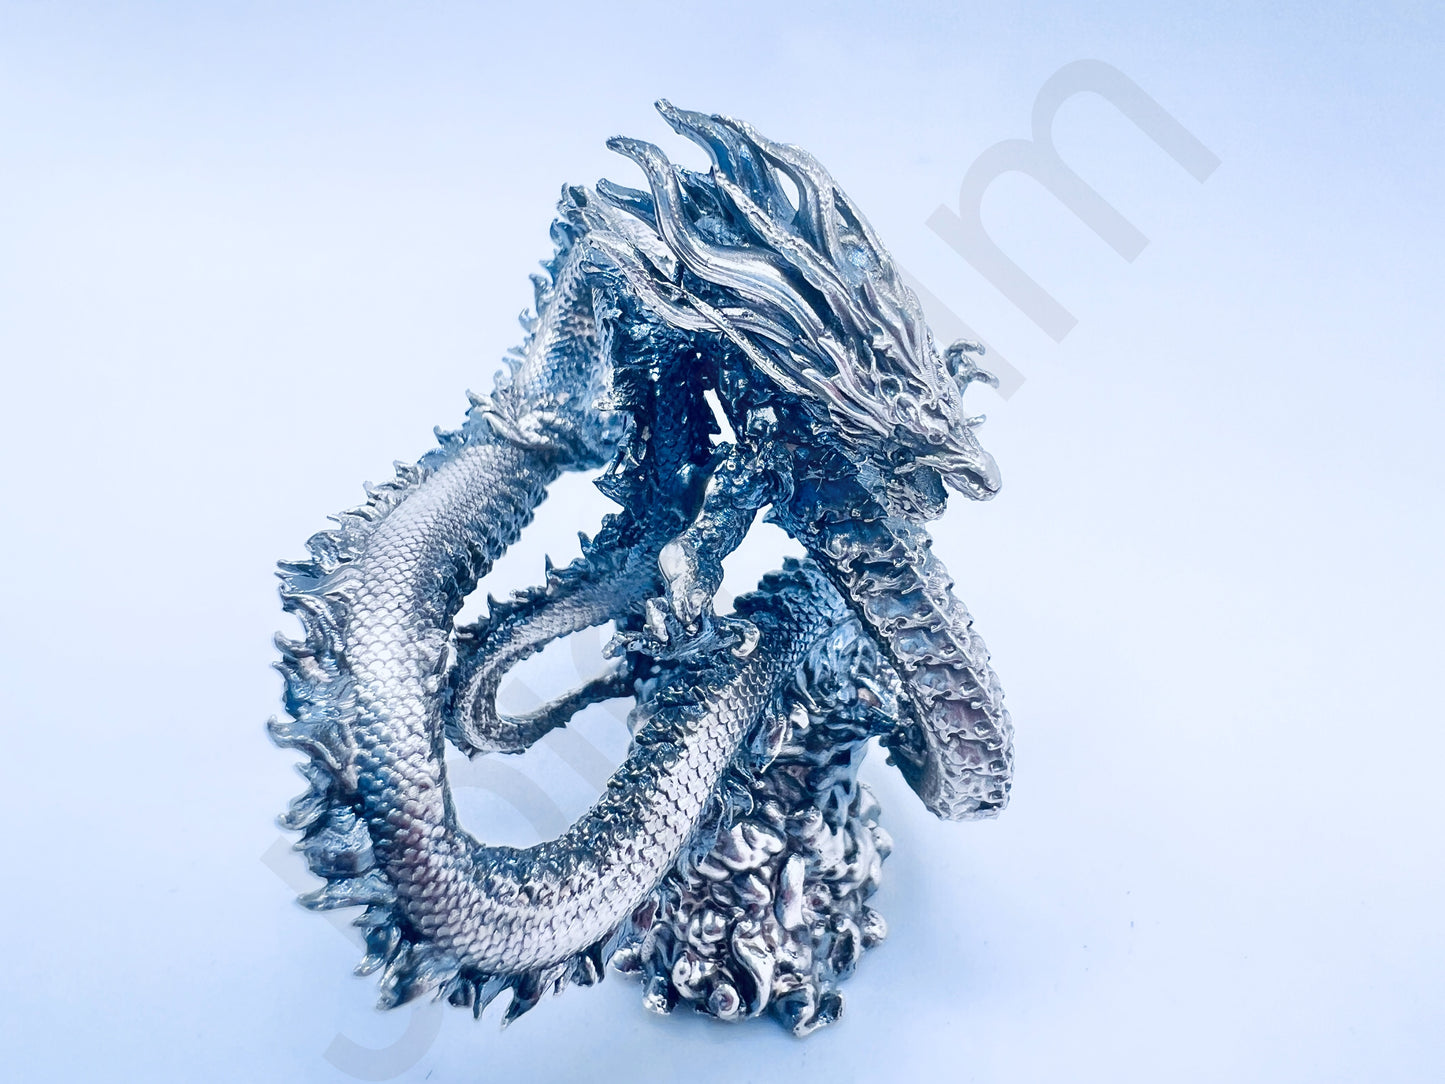 "Asian Dragon" .999+ Silver Statue, Hand Poured, Investment Casting, Custom Made [LIMITED MINTAGE: 100]